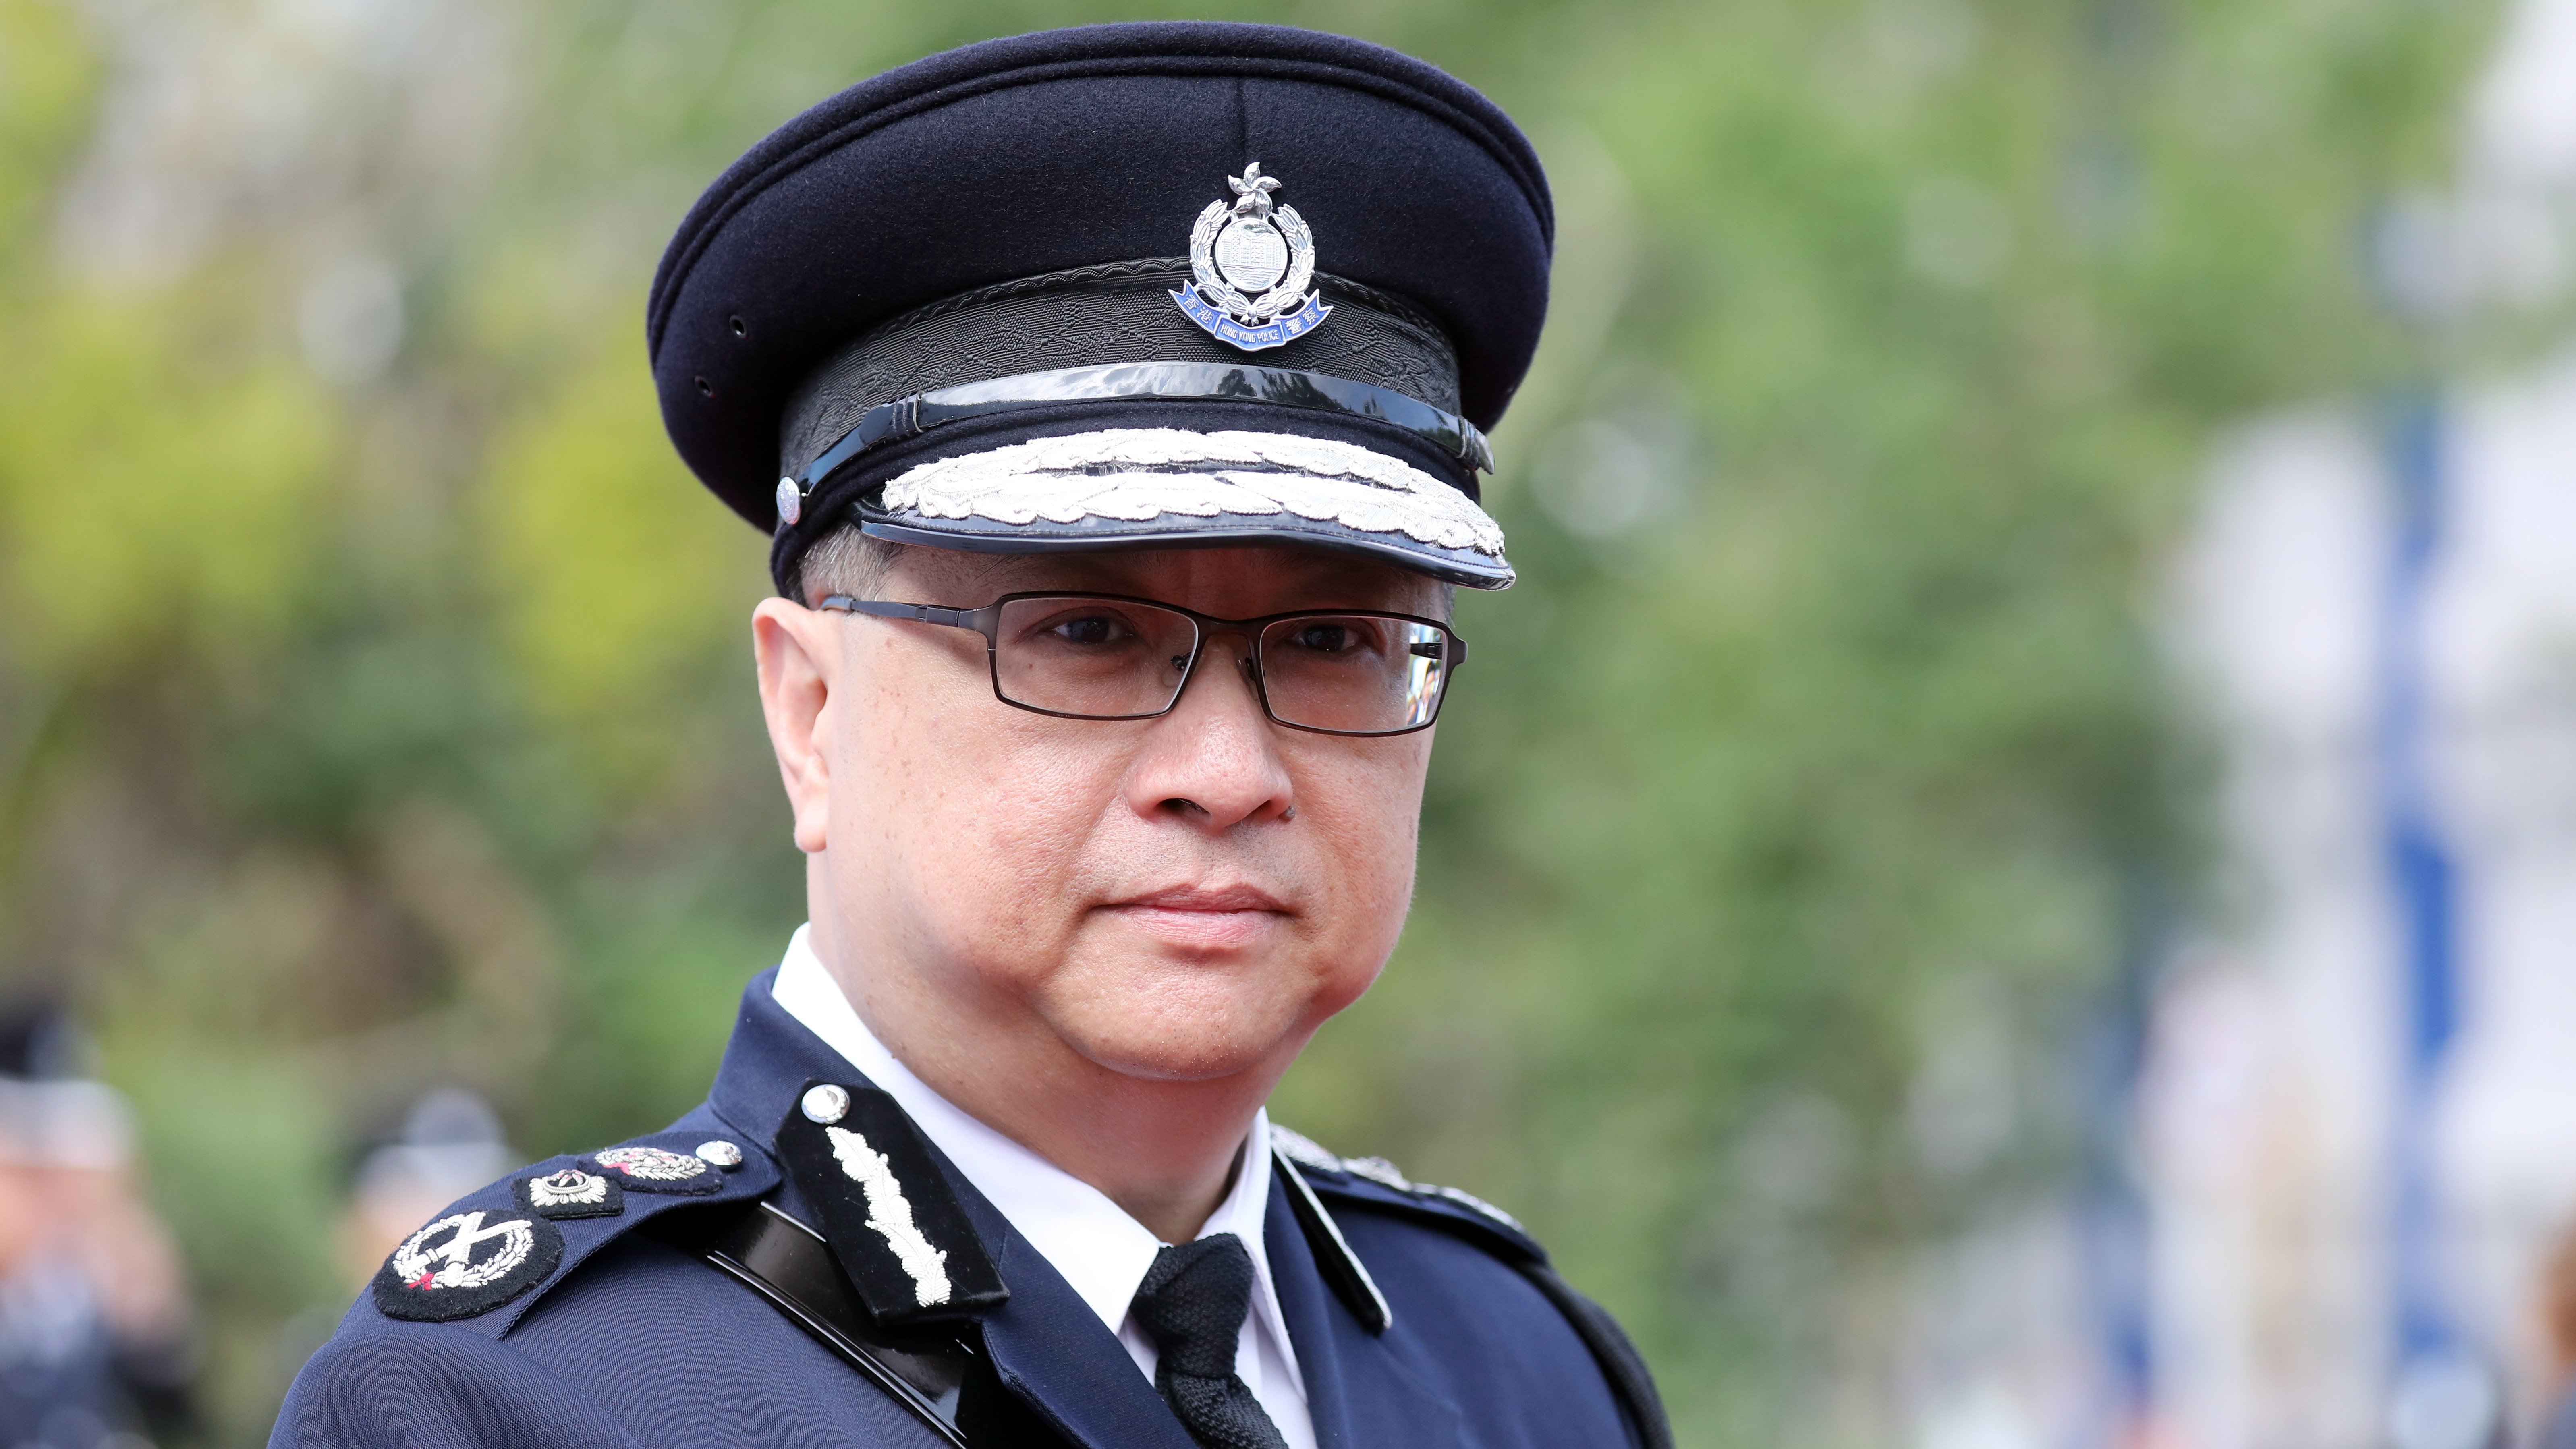 Commissioner of Police Stephen Lo said on Saturday he ‘absolutely will not tolerate such violent acts’. Photo: Dickson Lee